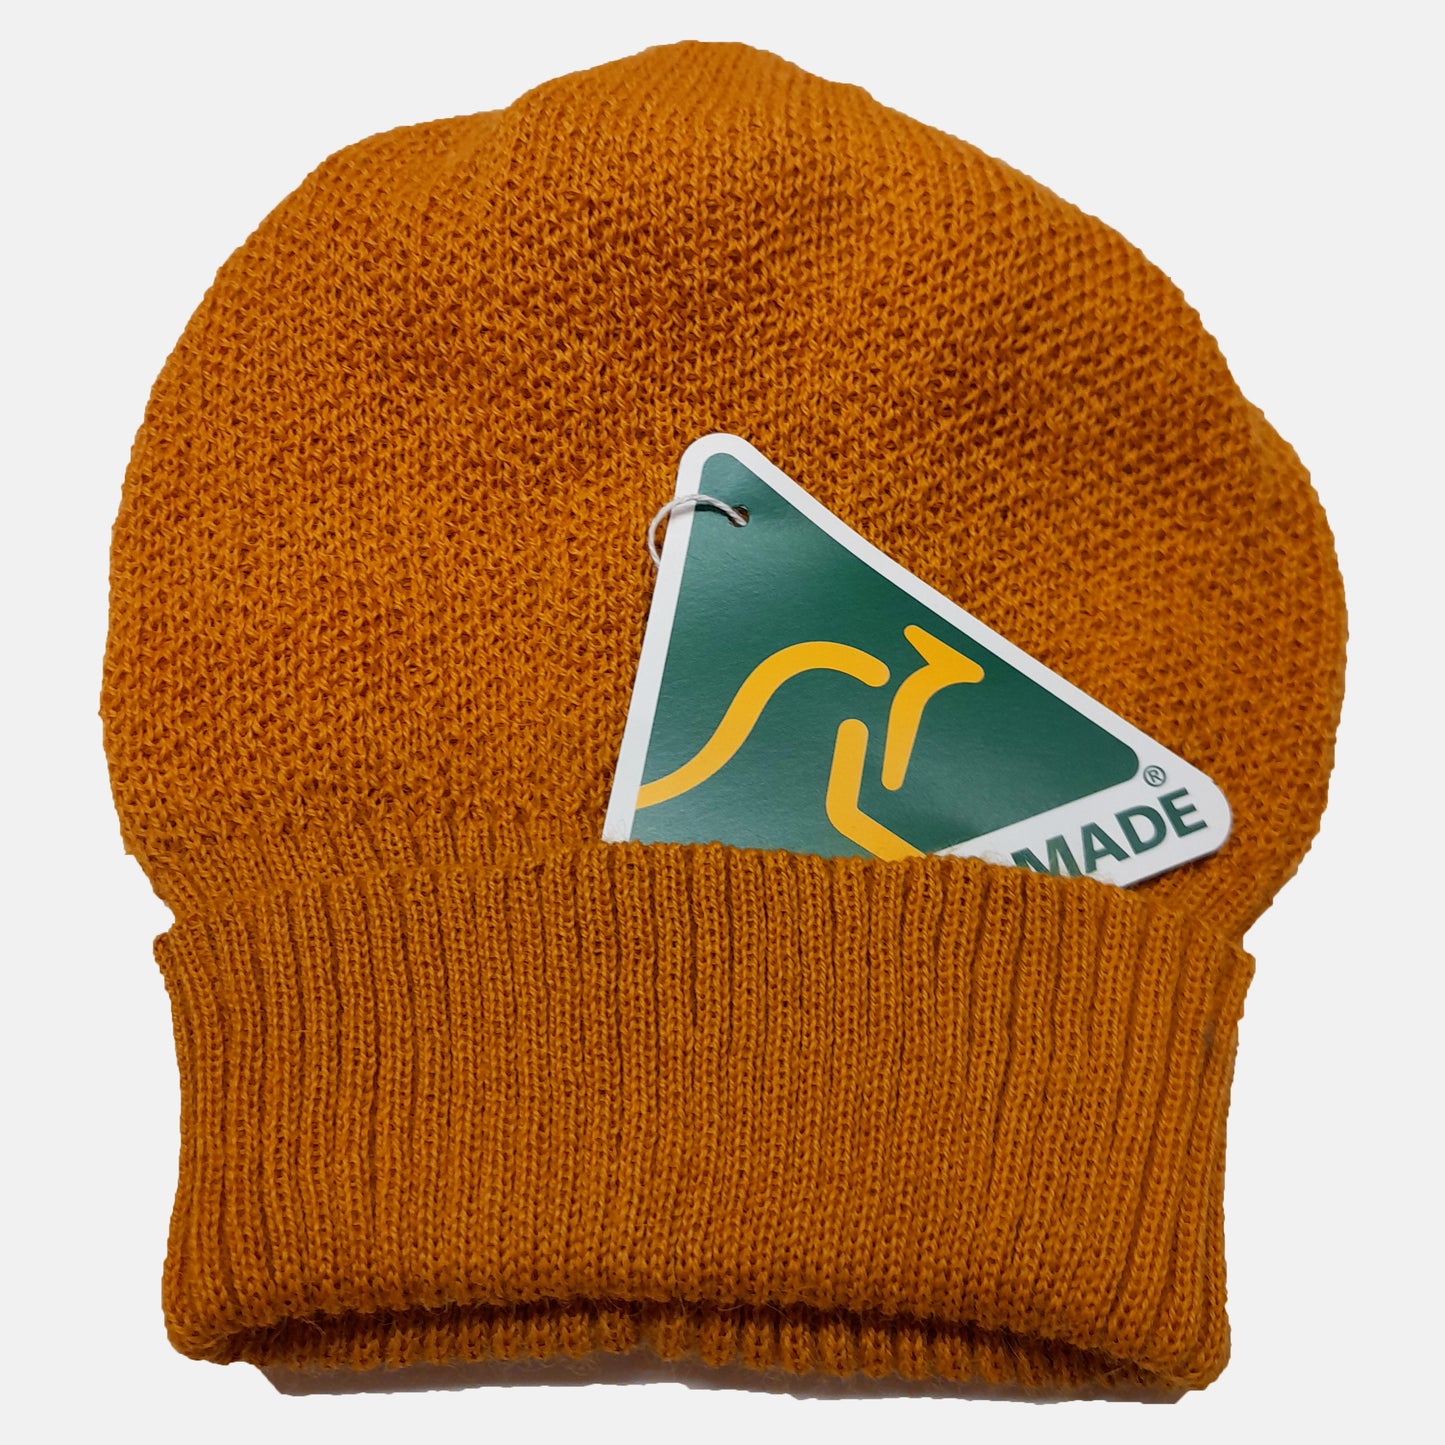 Unisex Adult Beanie in Bright Colors, Yellow